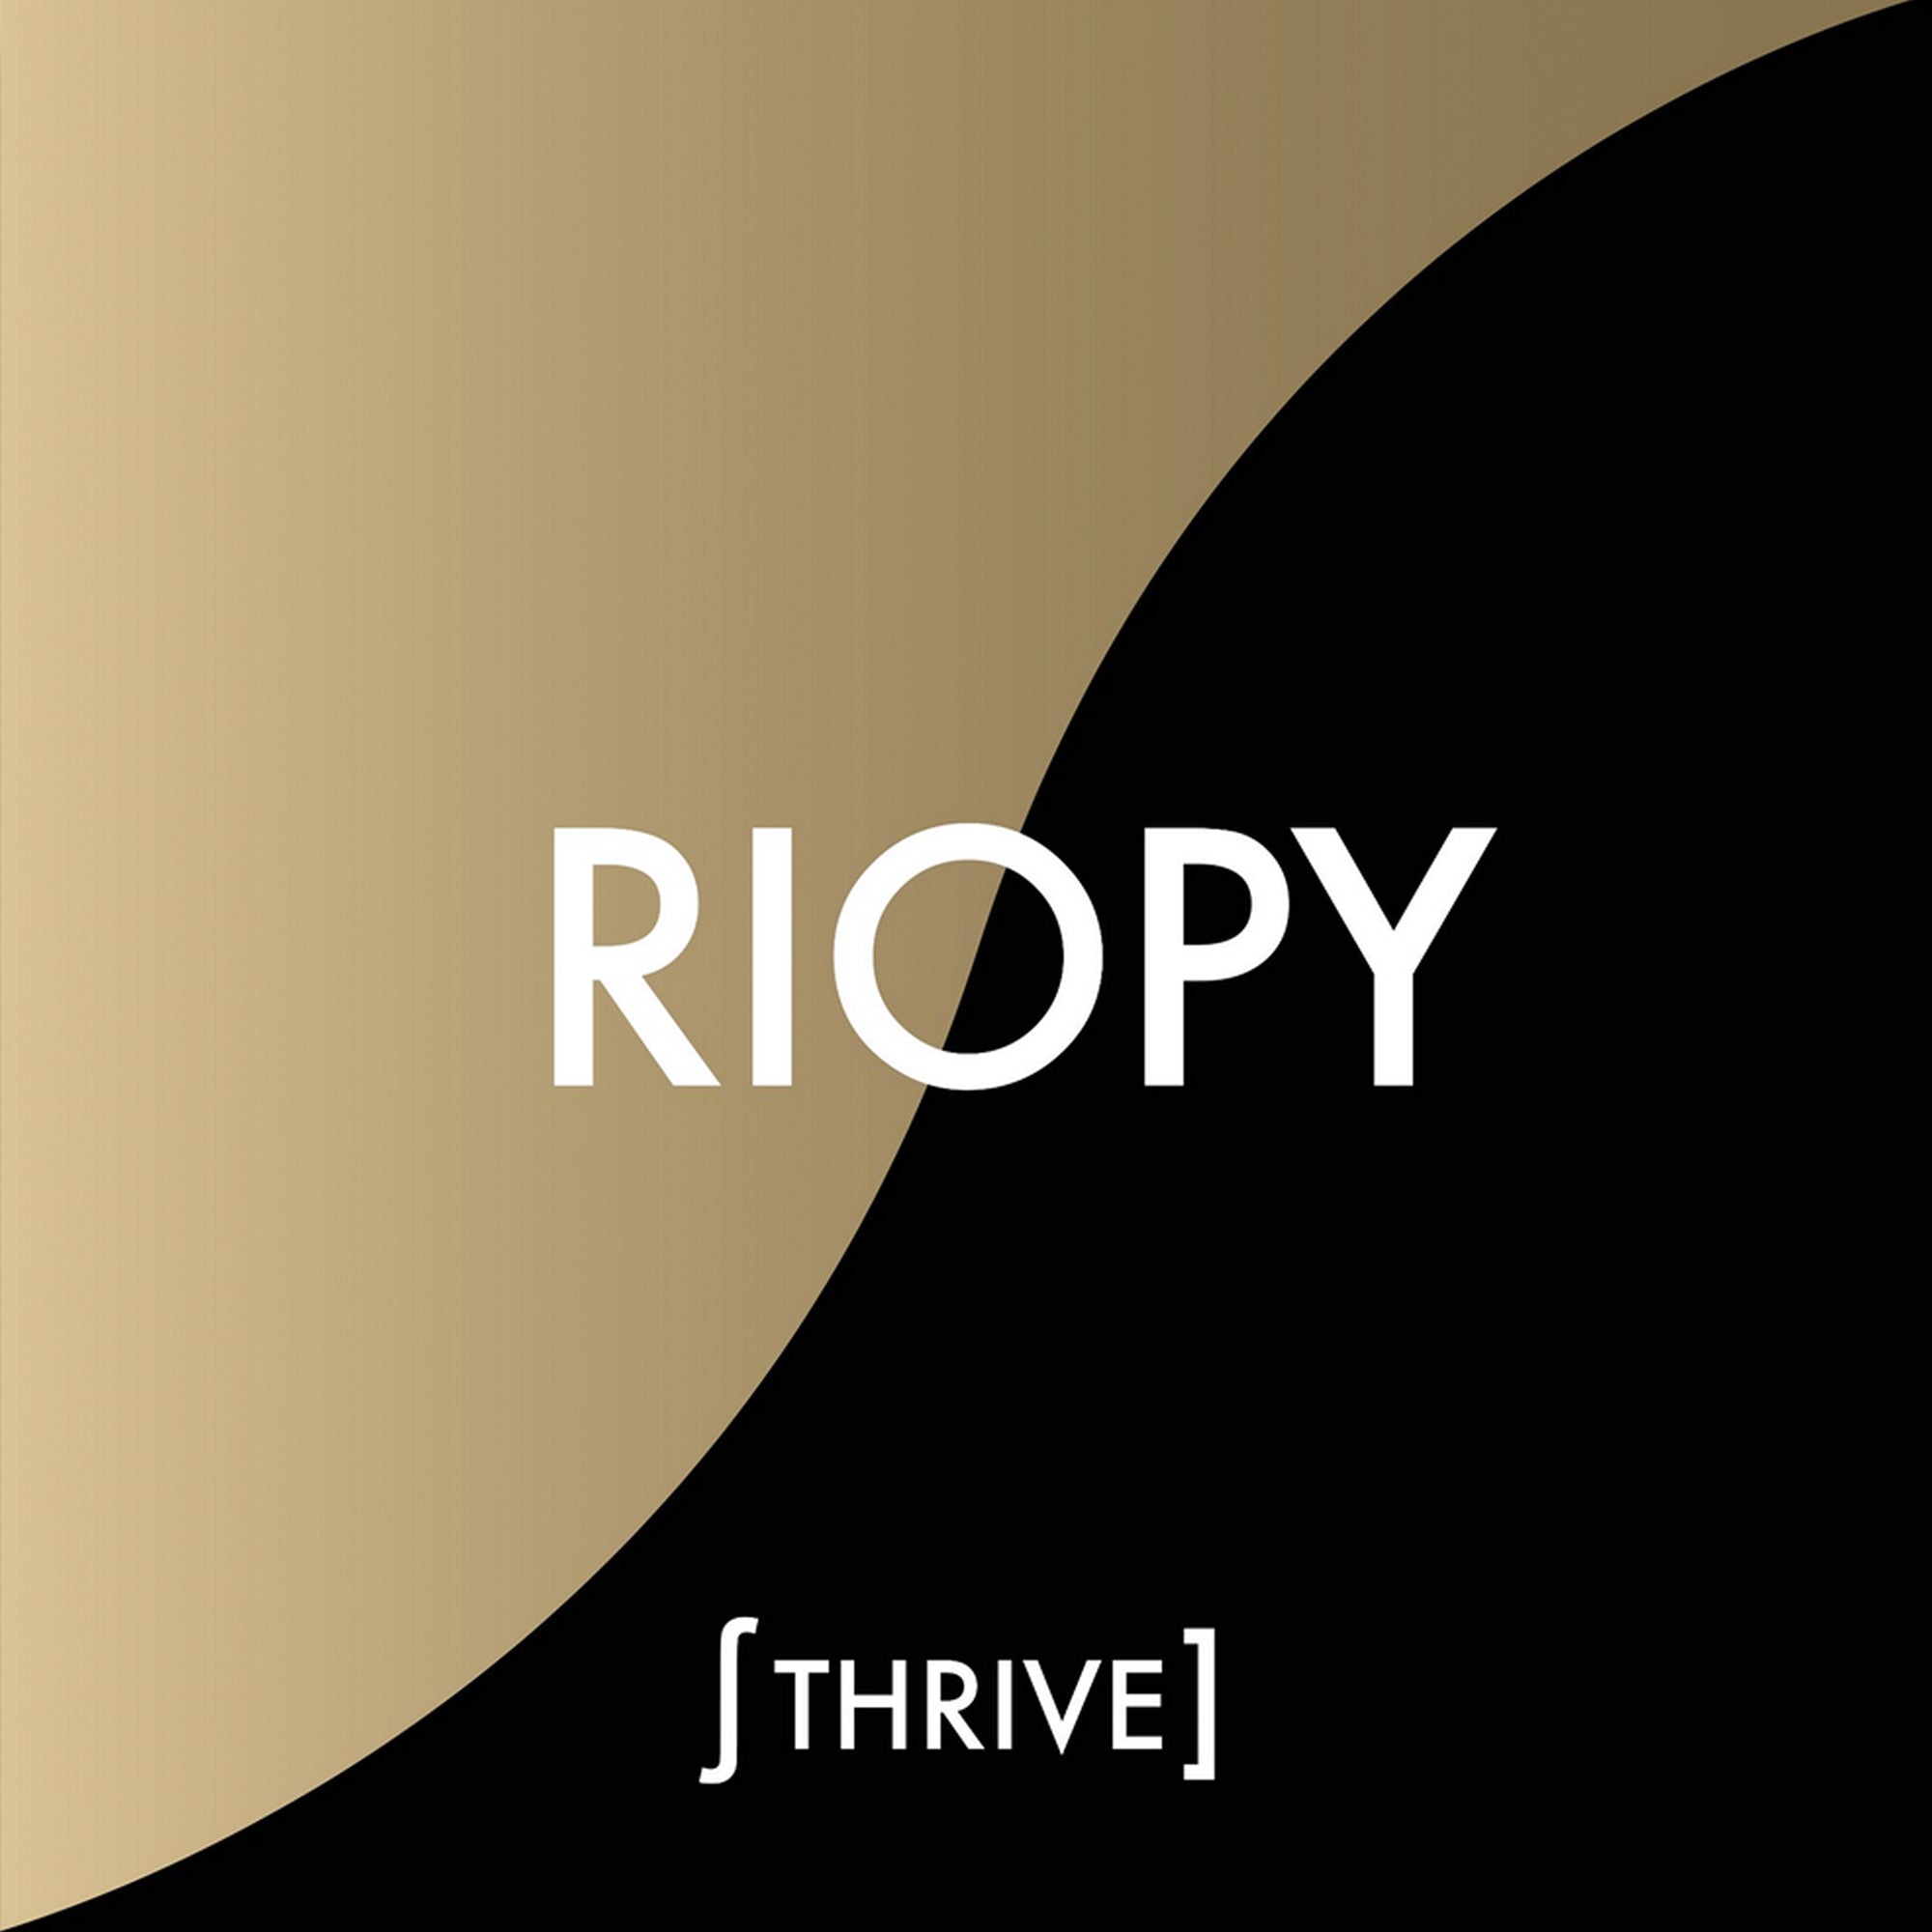 Nocturne sheet music from RIOPY's THRIVE album